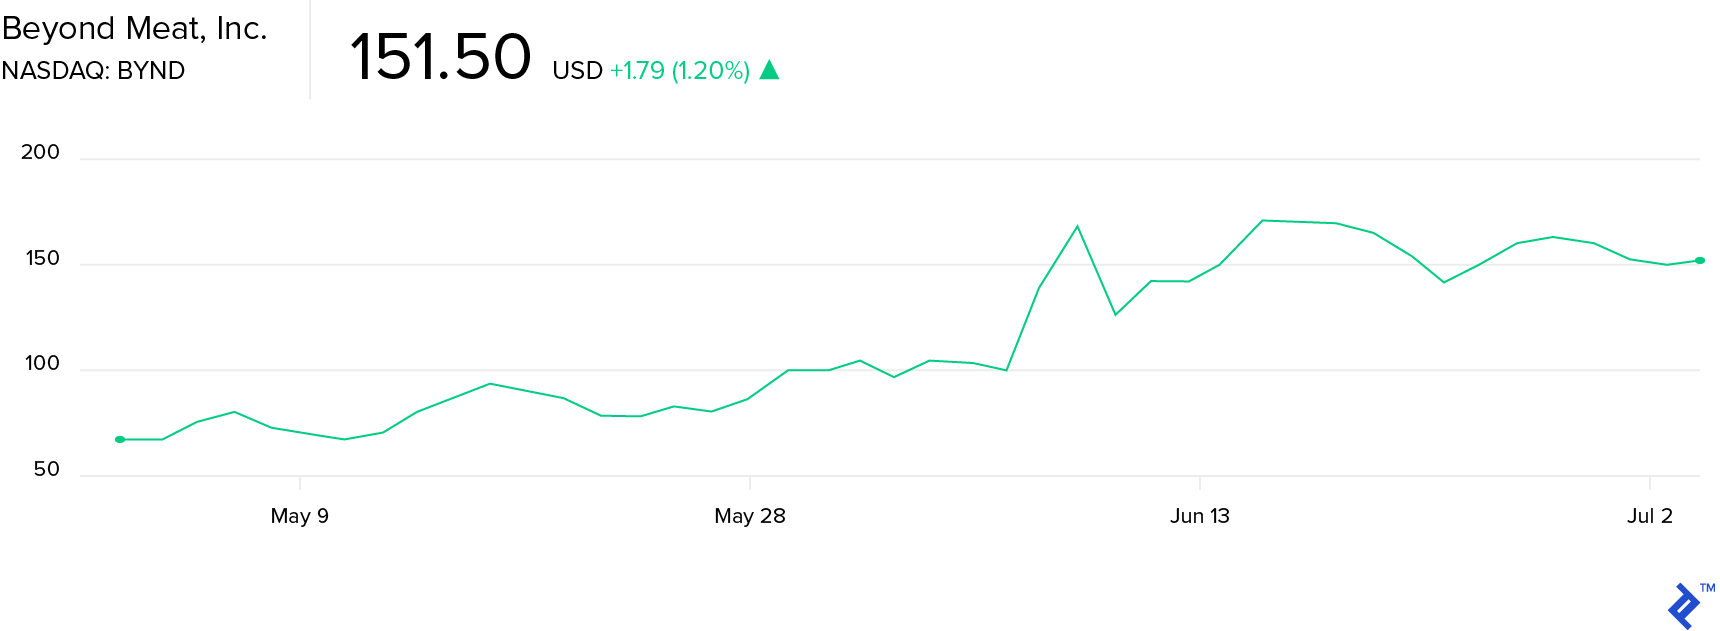 beyond meat stock prices